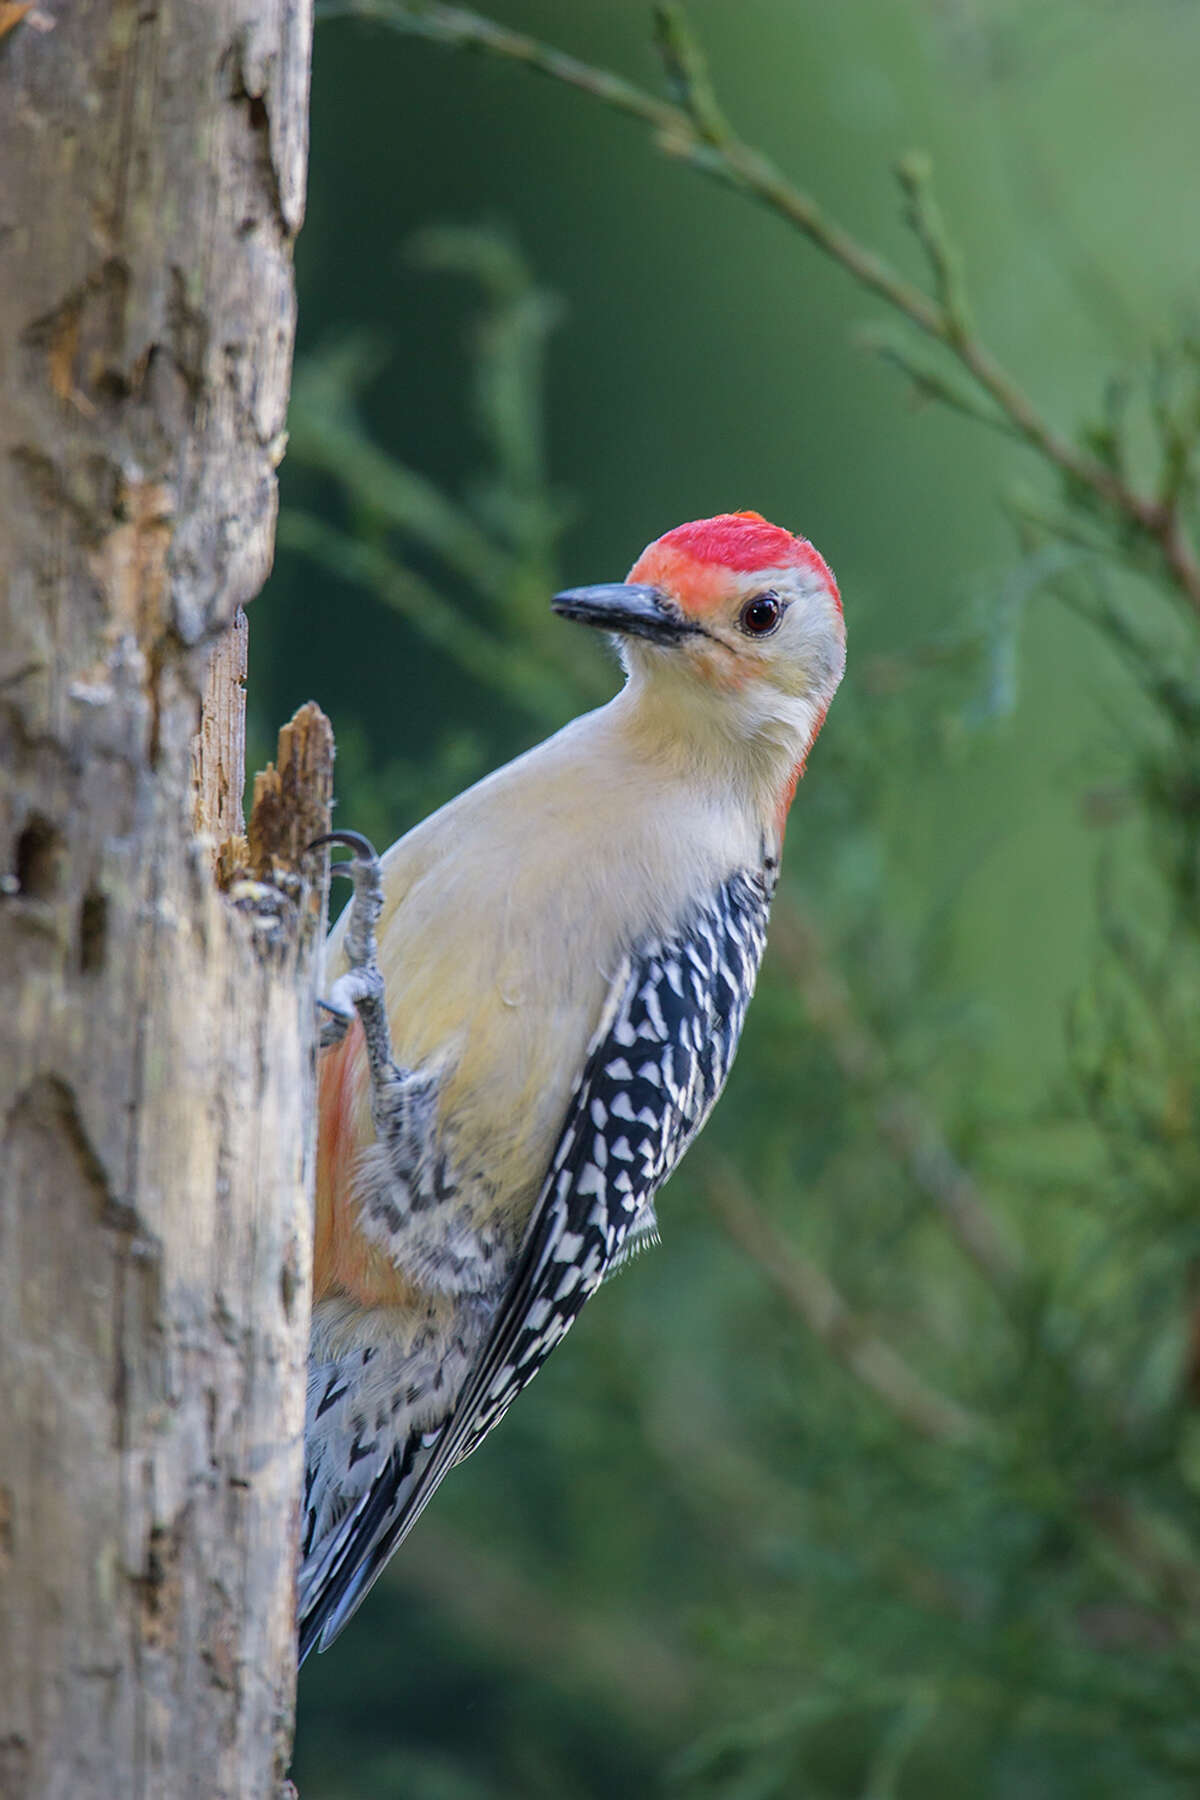 Red-bellied woodpeckers are named for the small patch of red on their bellies.﻿